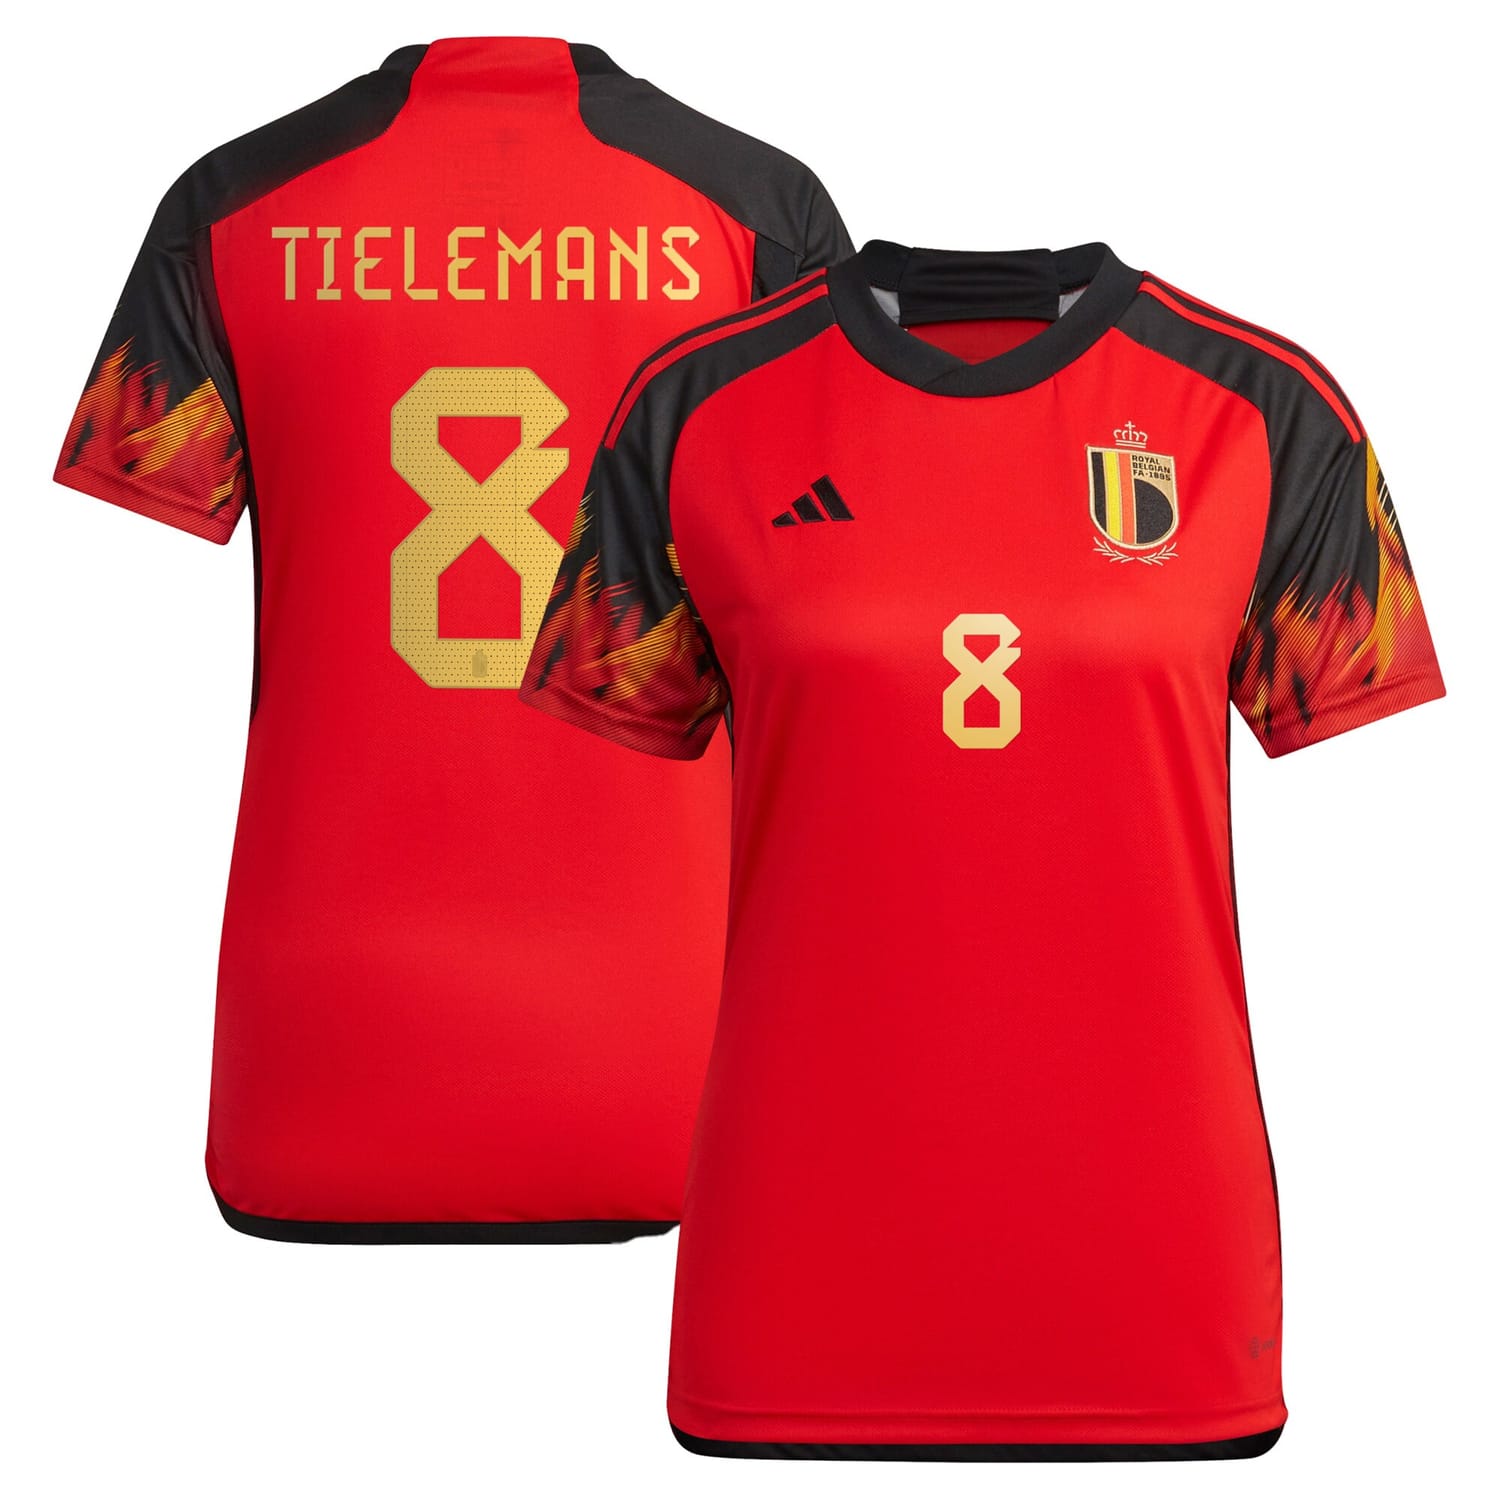 Belgium National Team Home Jersey Shirt 2022 player Youri Tielemans 8 printing for Women